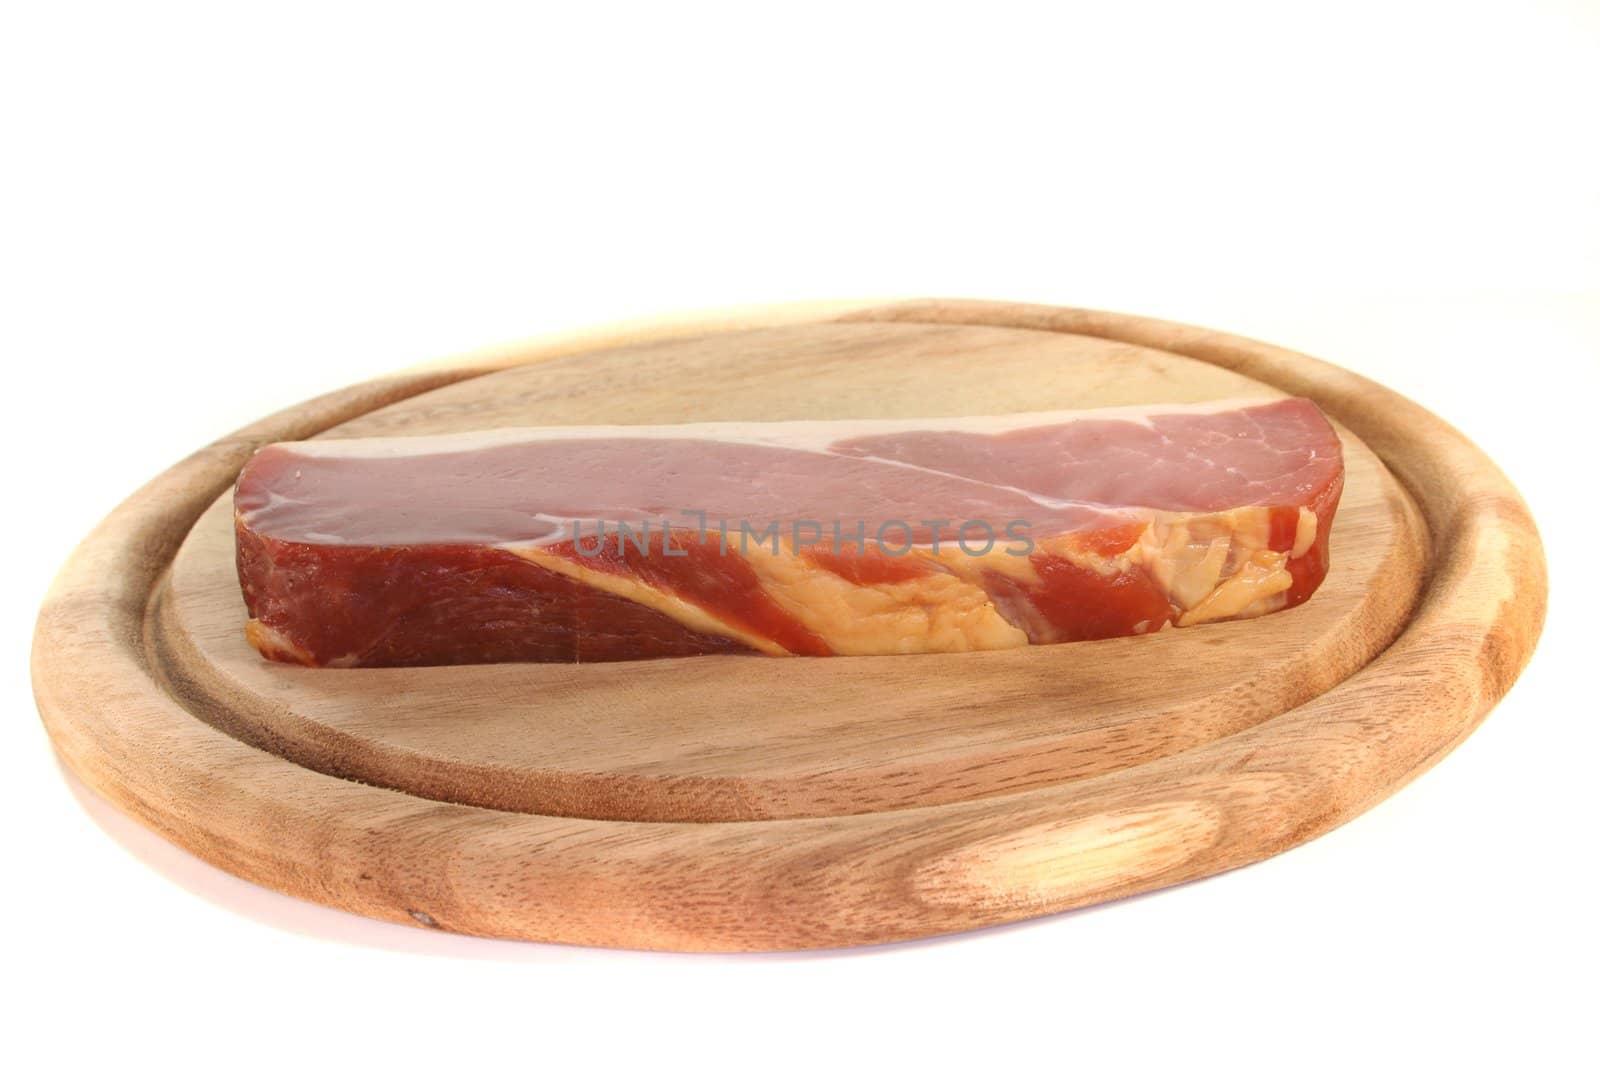 smoked bacon on a wooden board before a white background